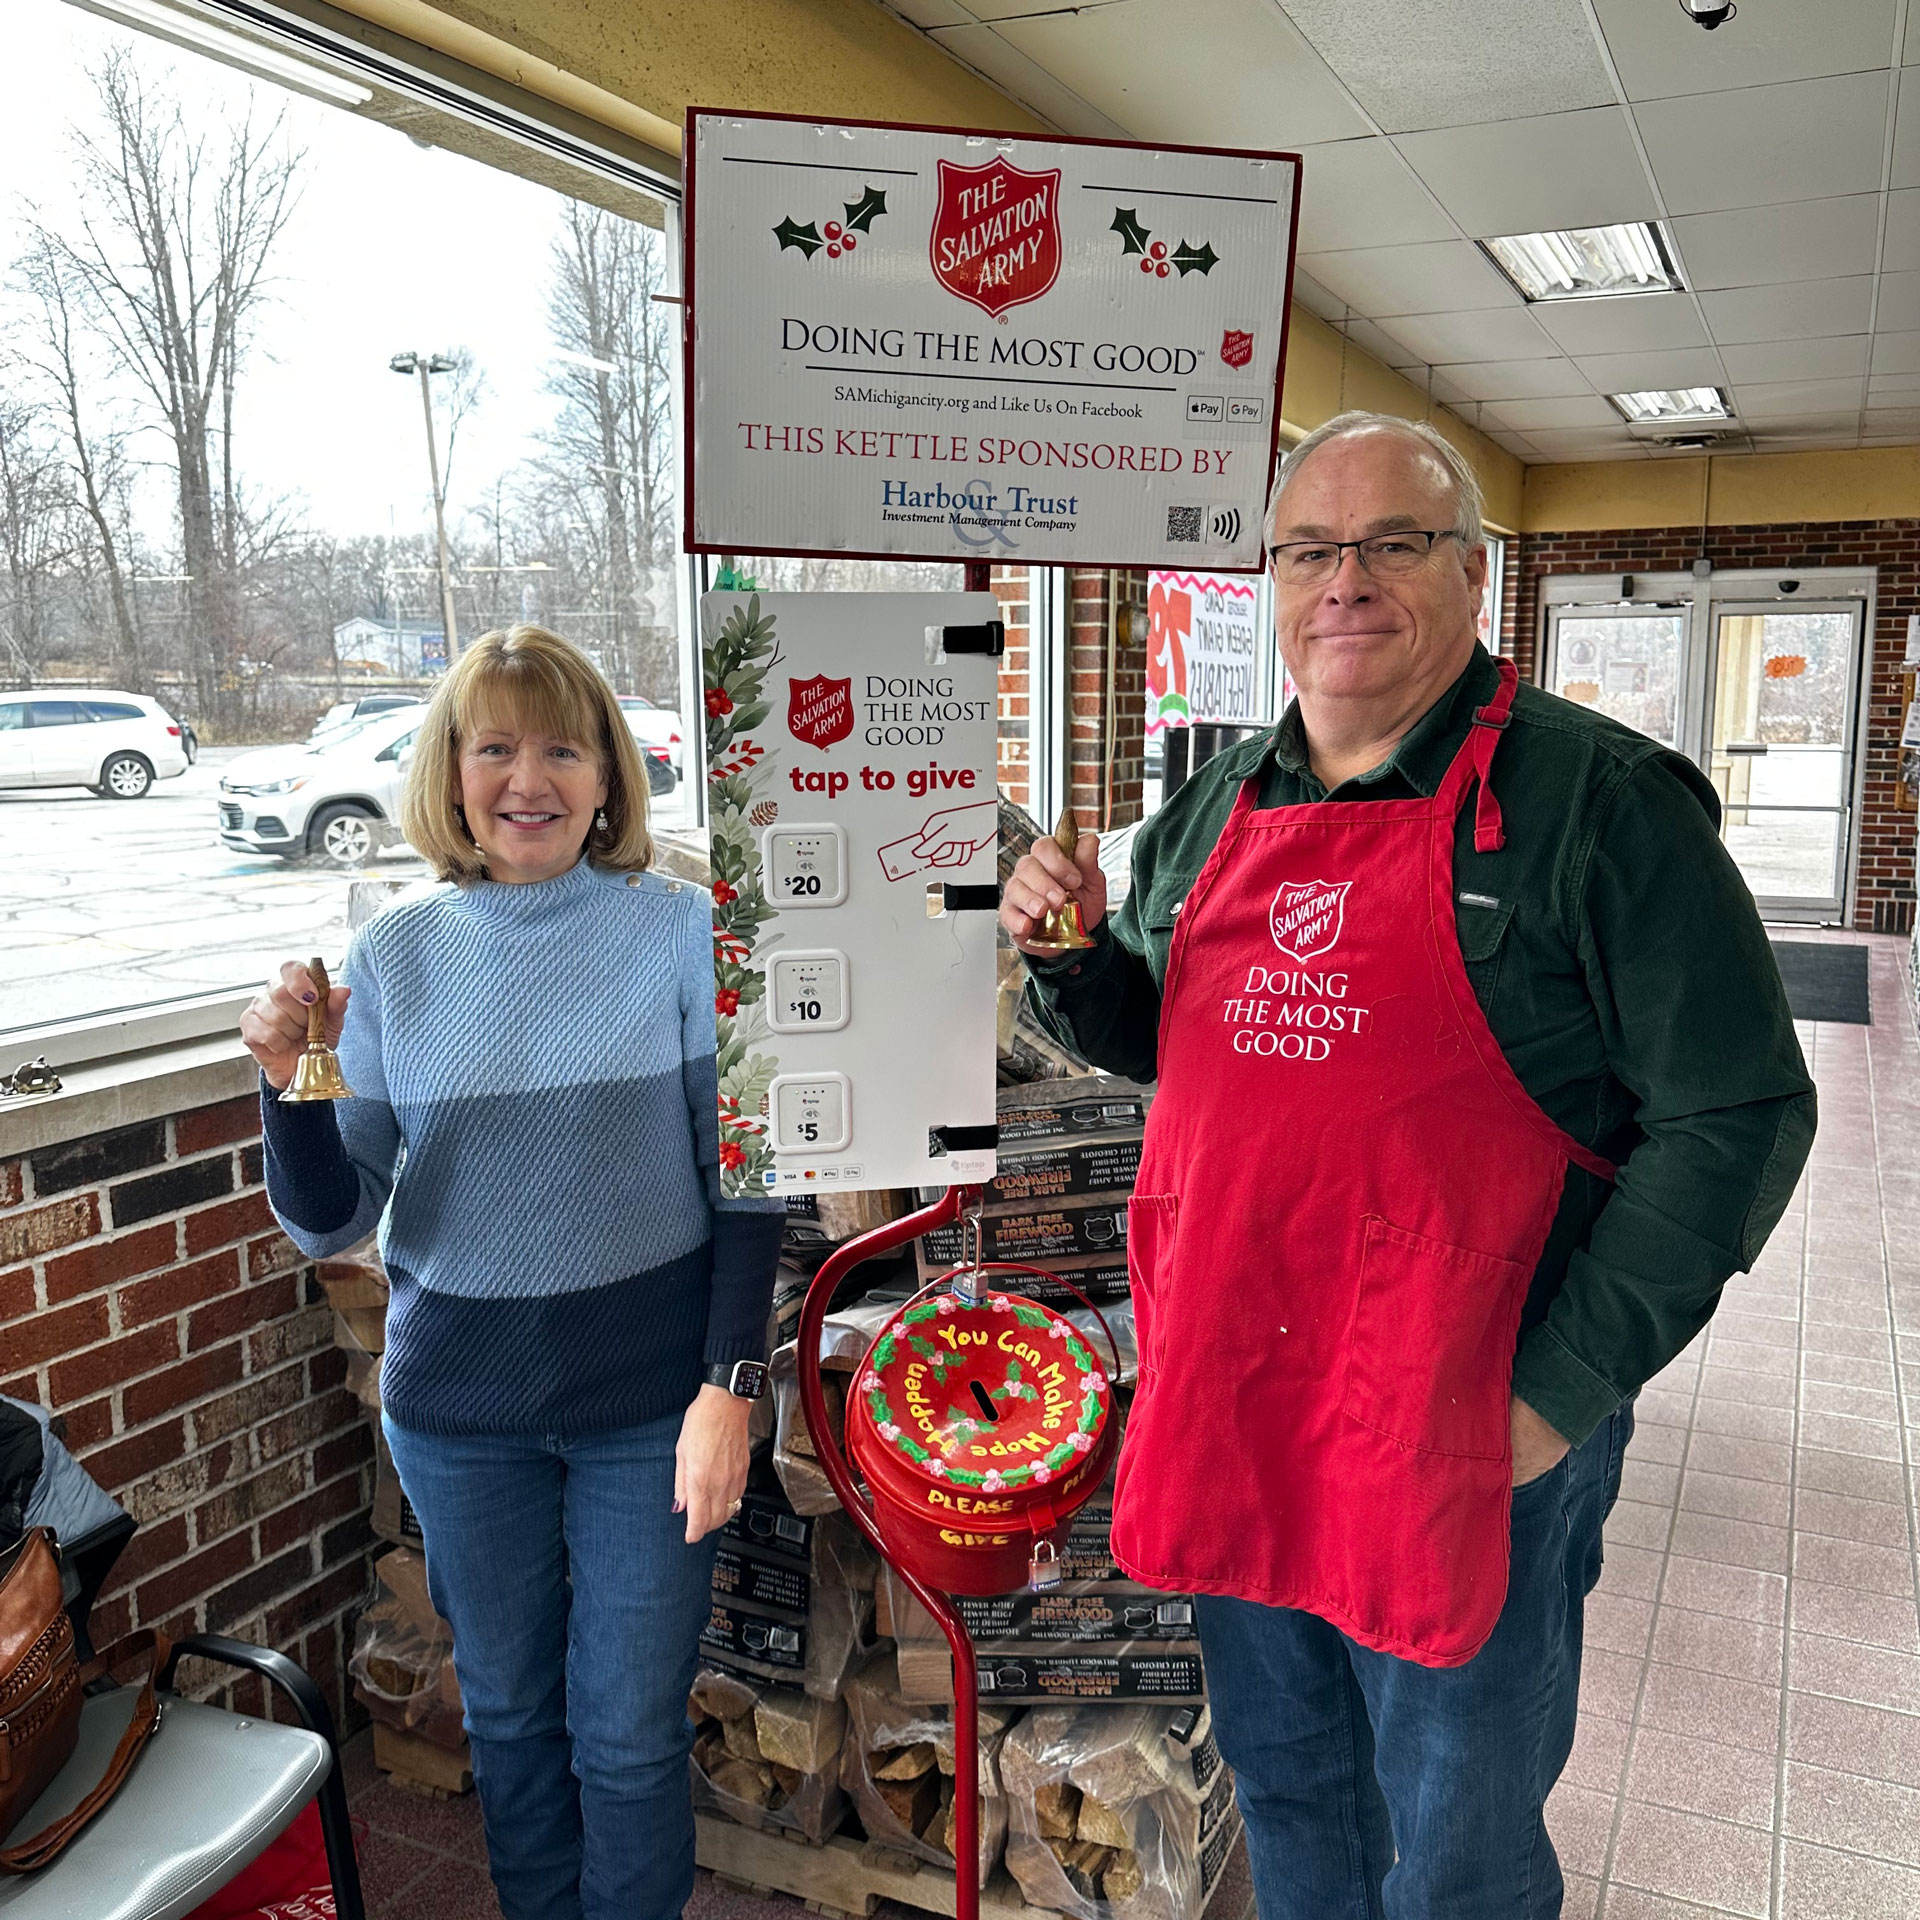 Randy and his wife volunteering with The Salvation Army